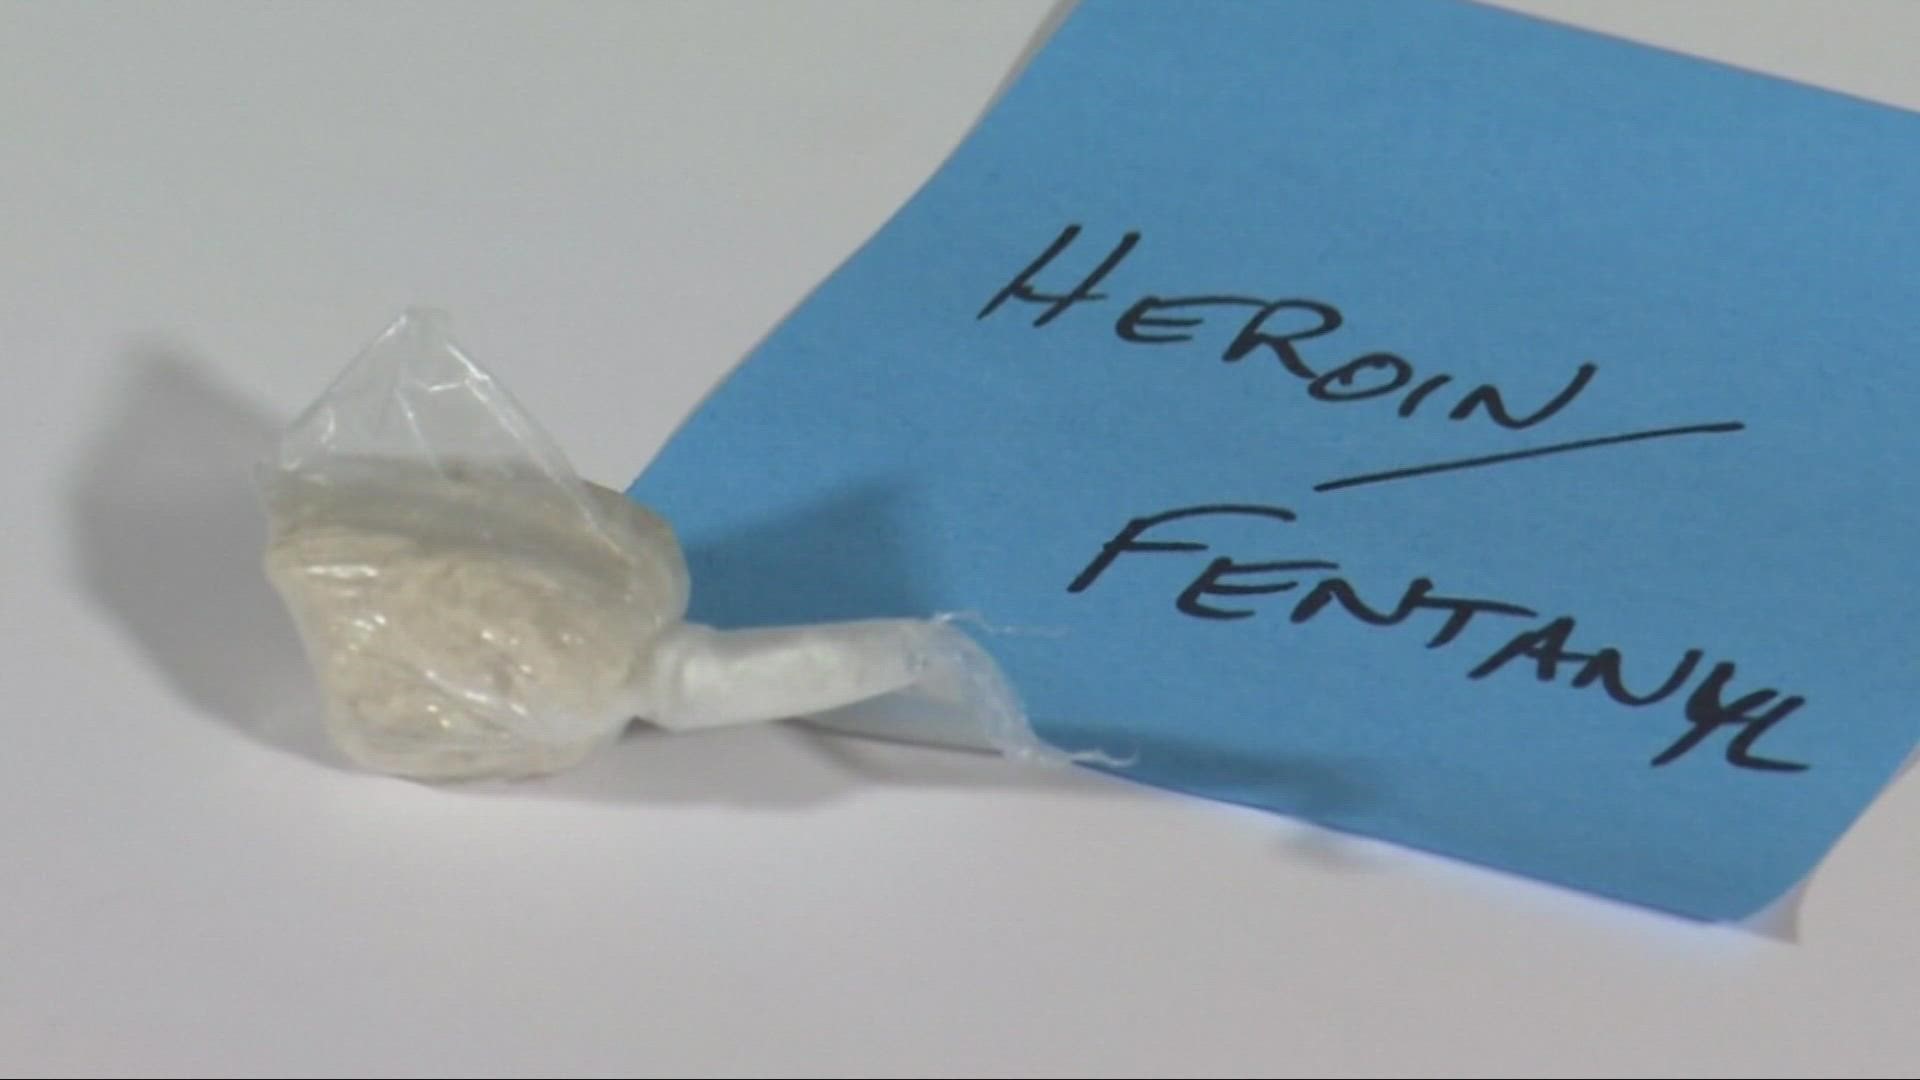 Fatal cases relating to heroin and fentanyl in just the month of October are at least 35.  There are fourteen cases still pending testing.